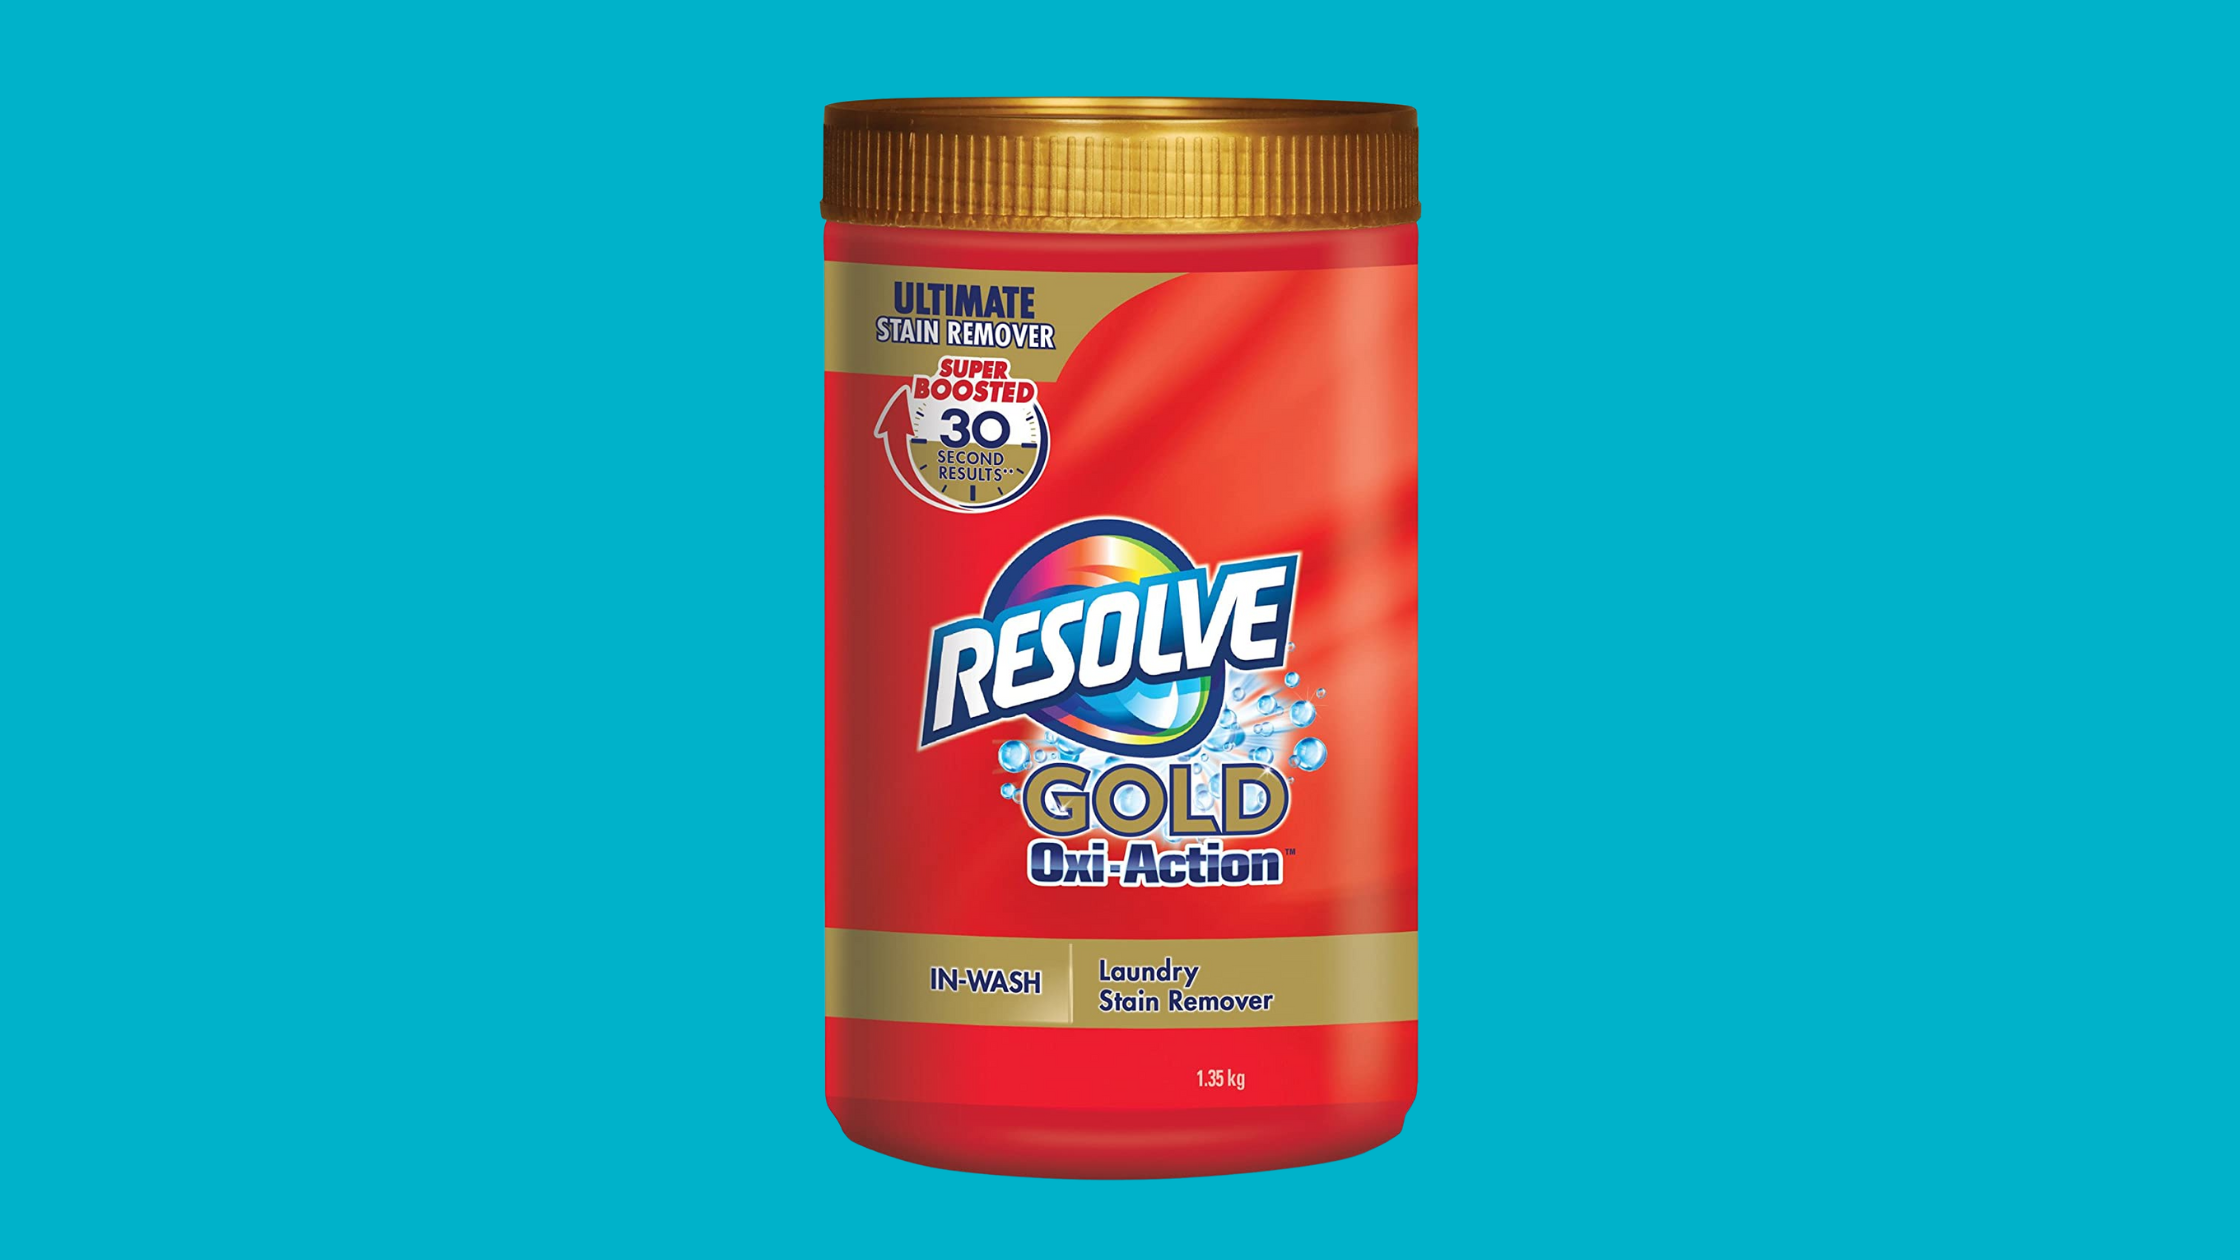 Resolve Gold Laundry Stain Remover